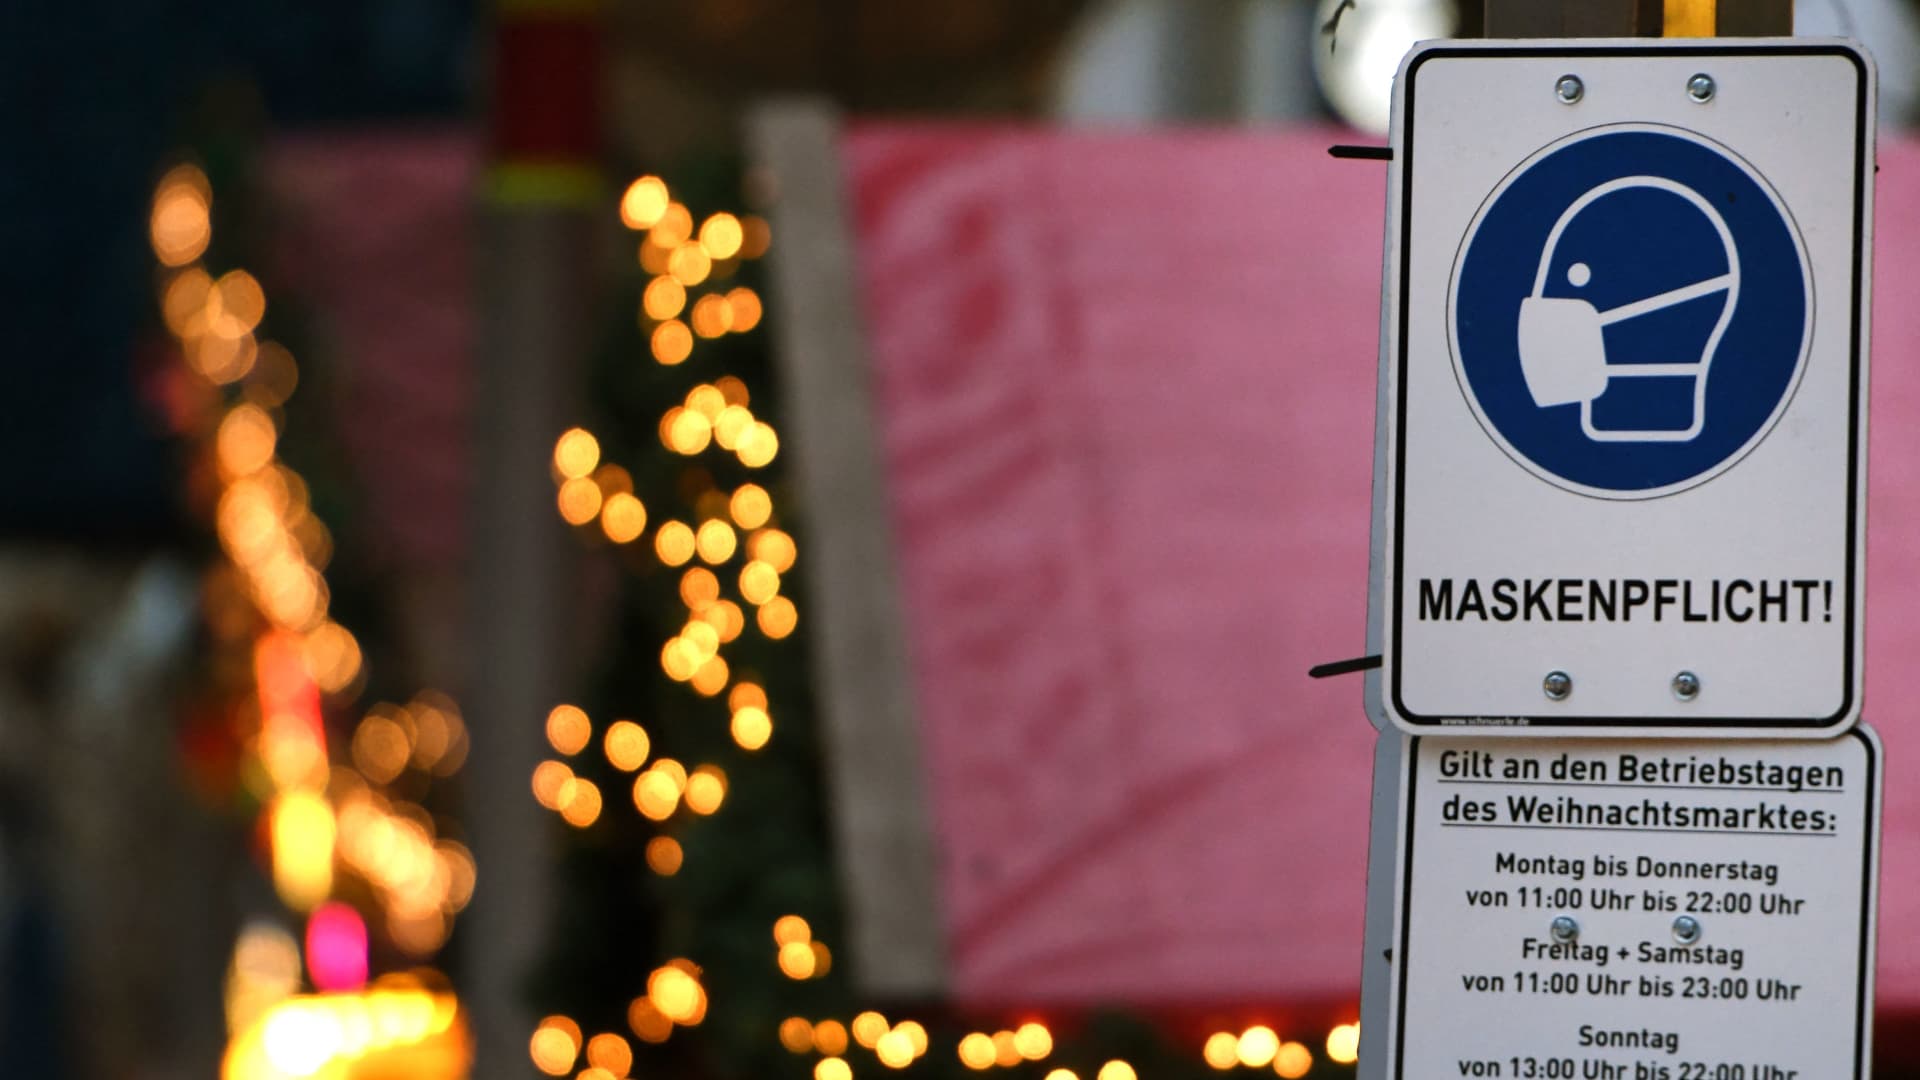 A sign indicating an obligation to wear face masks is seen at the Christmas market in the city of Duisburg, western Germany on November 29, 2021.